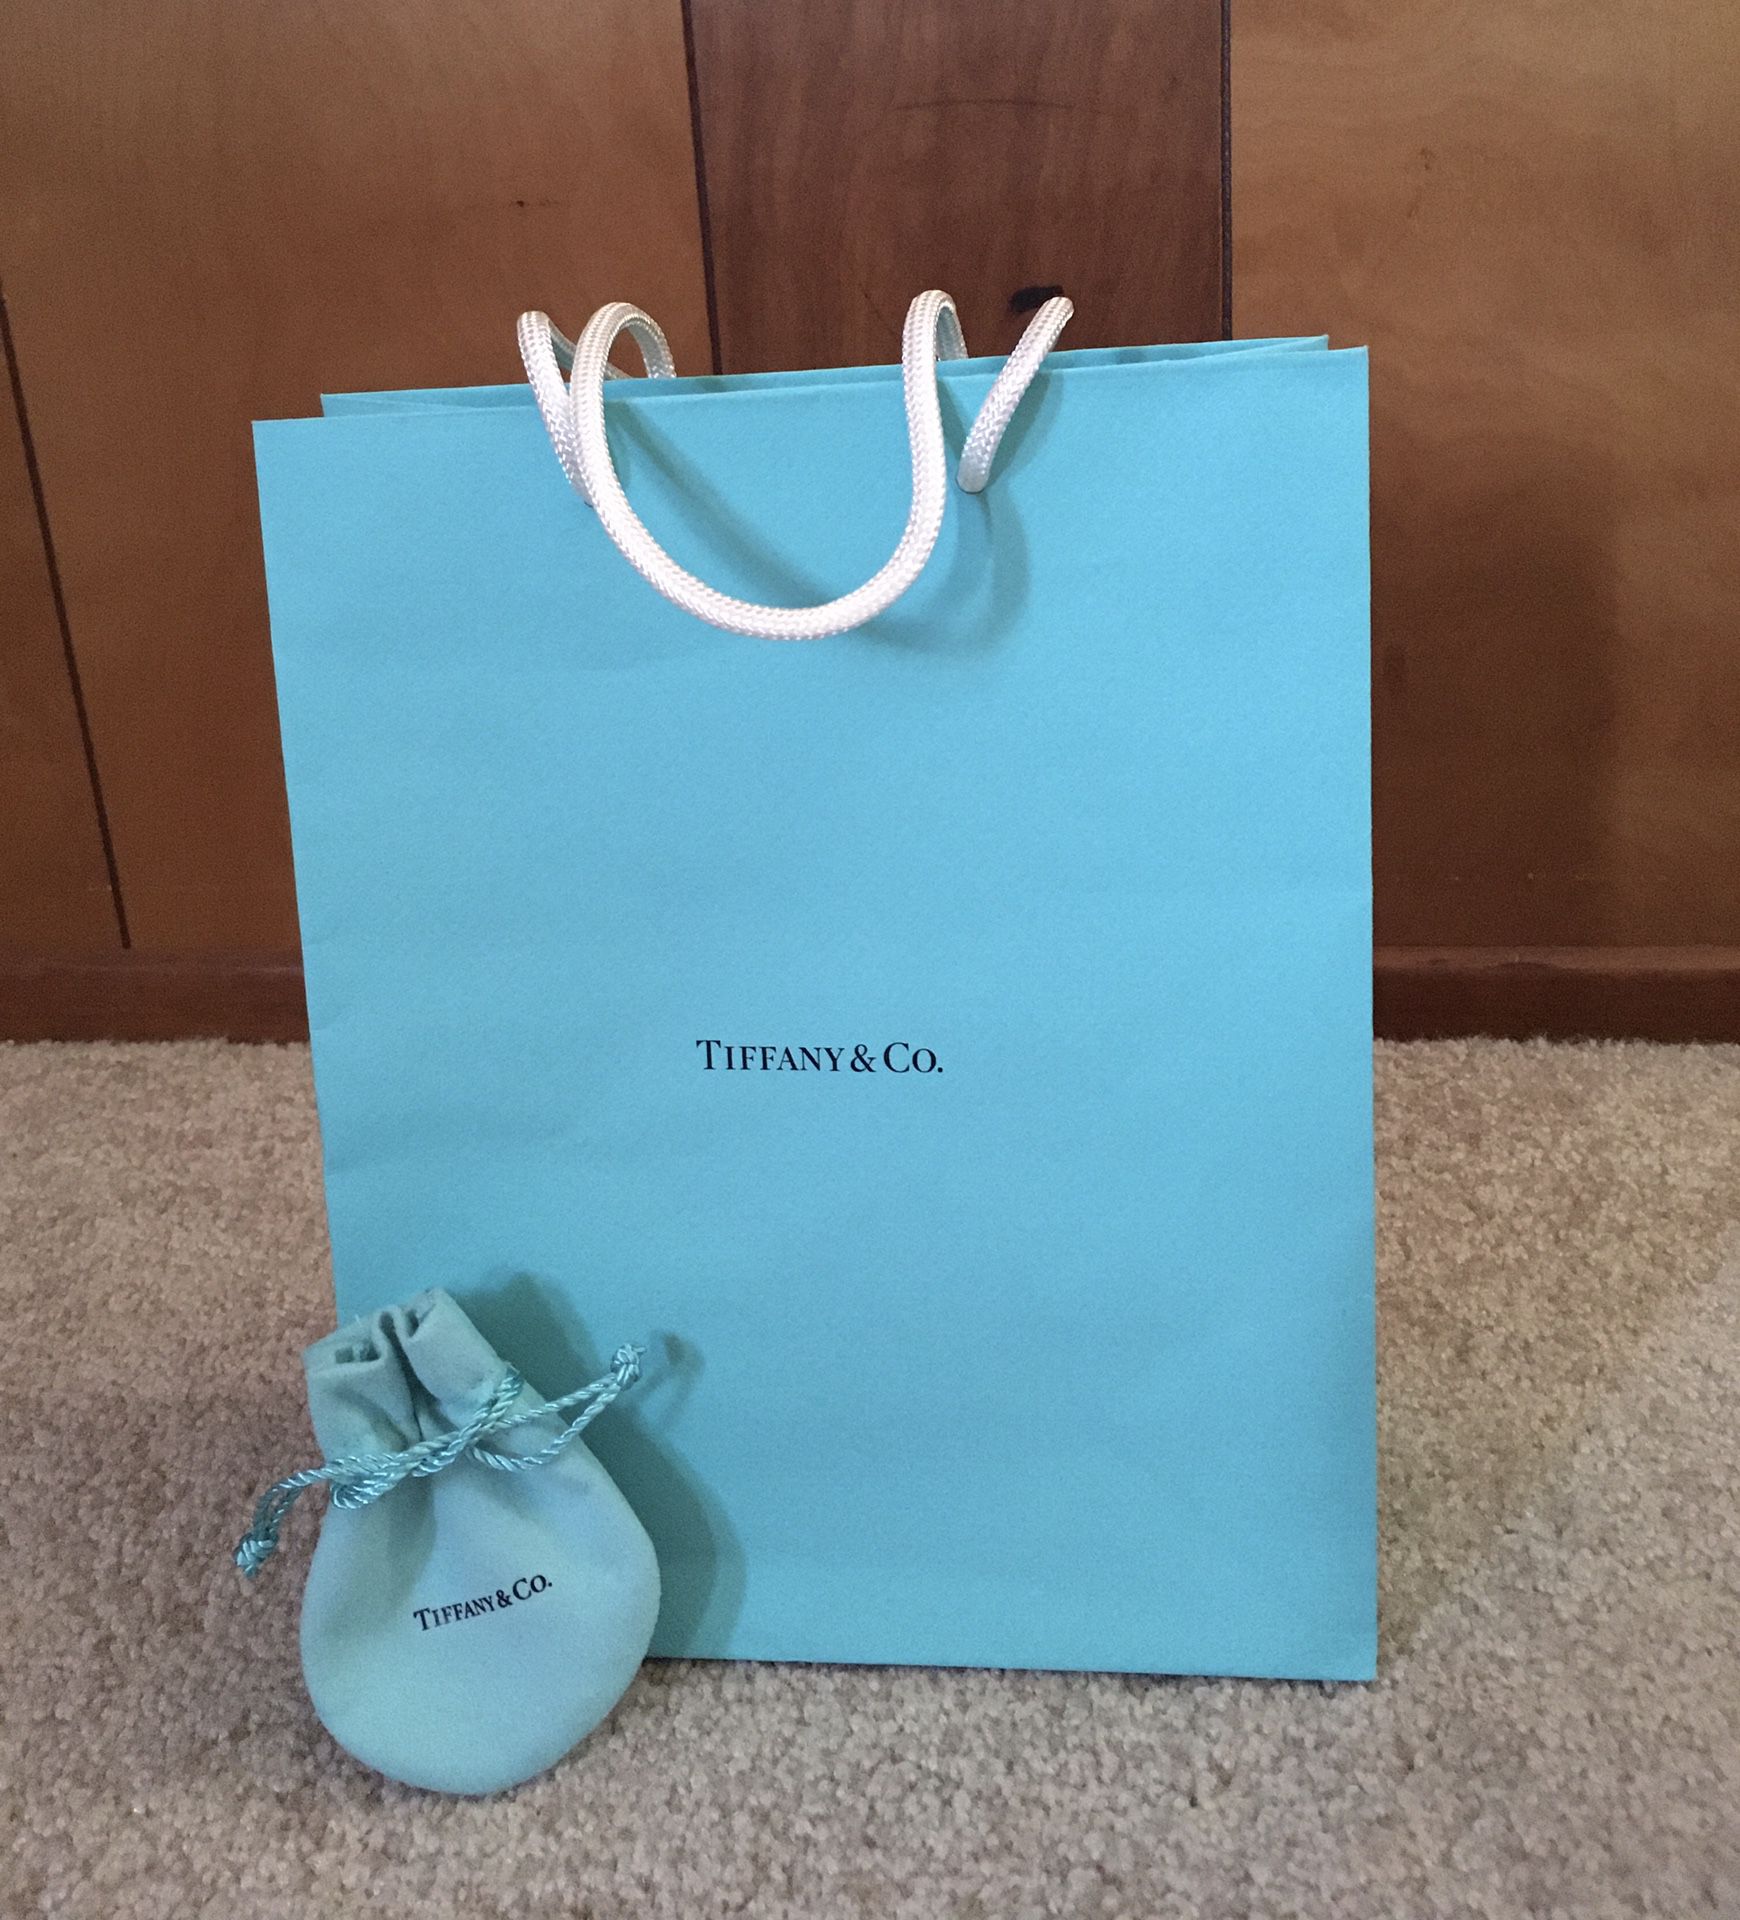 100% AUTHENTIC TIFFANY & CO. SHOPPING BAG & JEWELRY DRAWSTRING DUST BAG